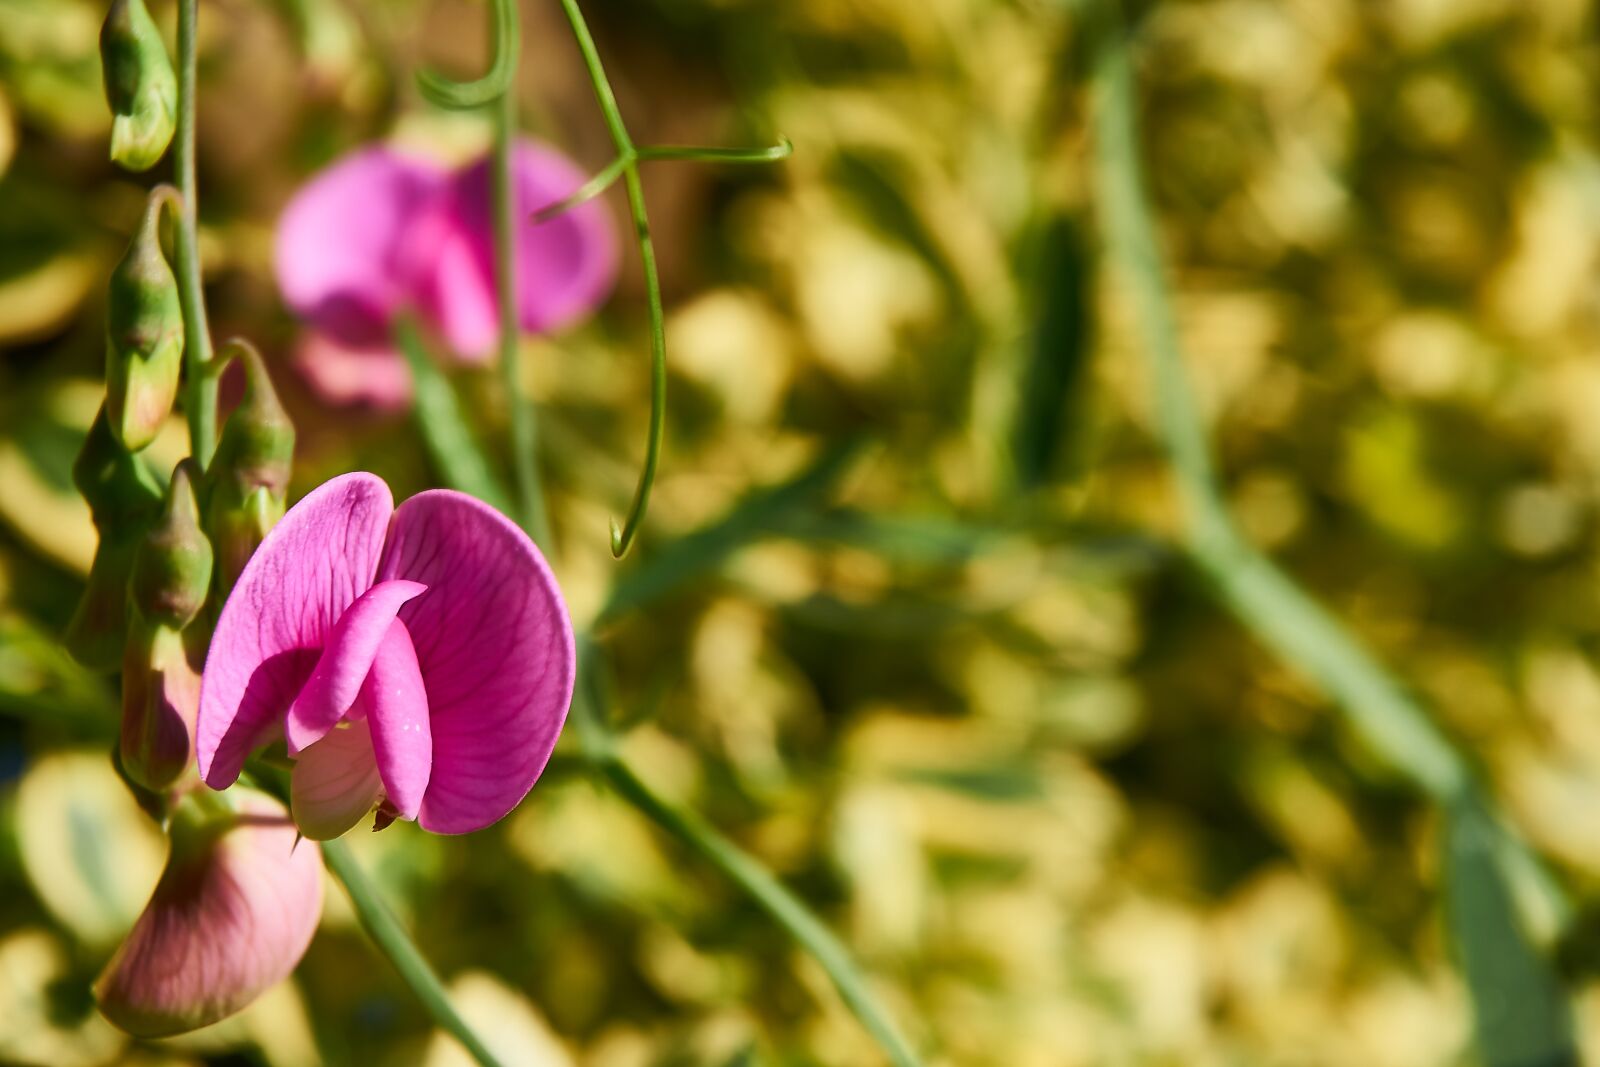 Sony a6000 + Sony E PZ 16-50 mm F3.5-5.6 OSS (SELP1650) sample photo. Lathyrus latifolius, pink pearl photography